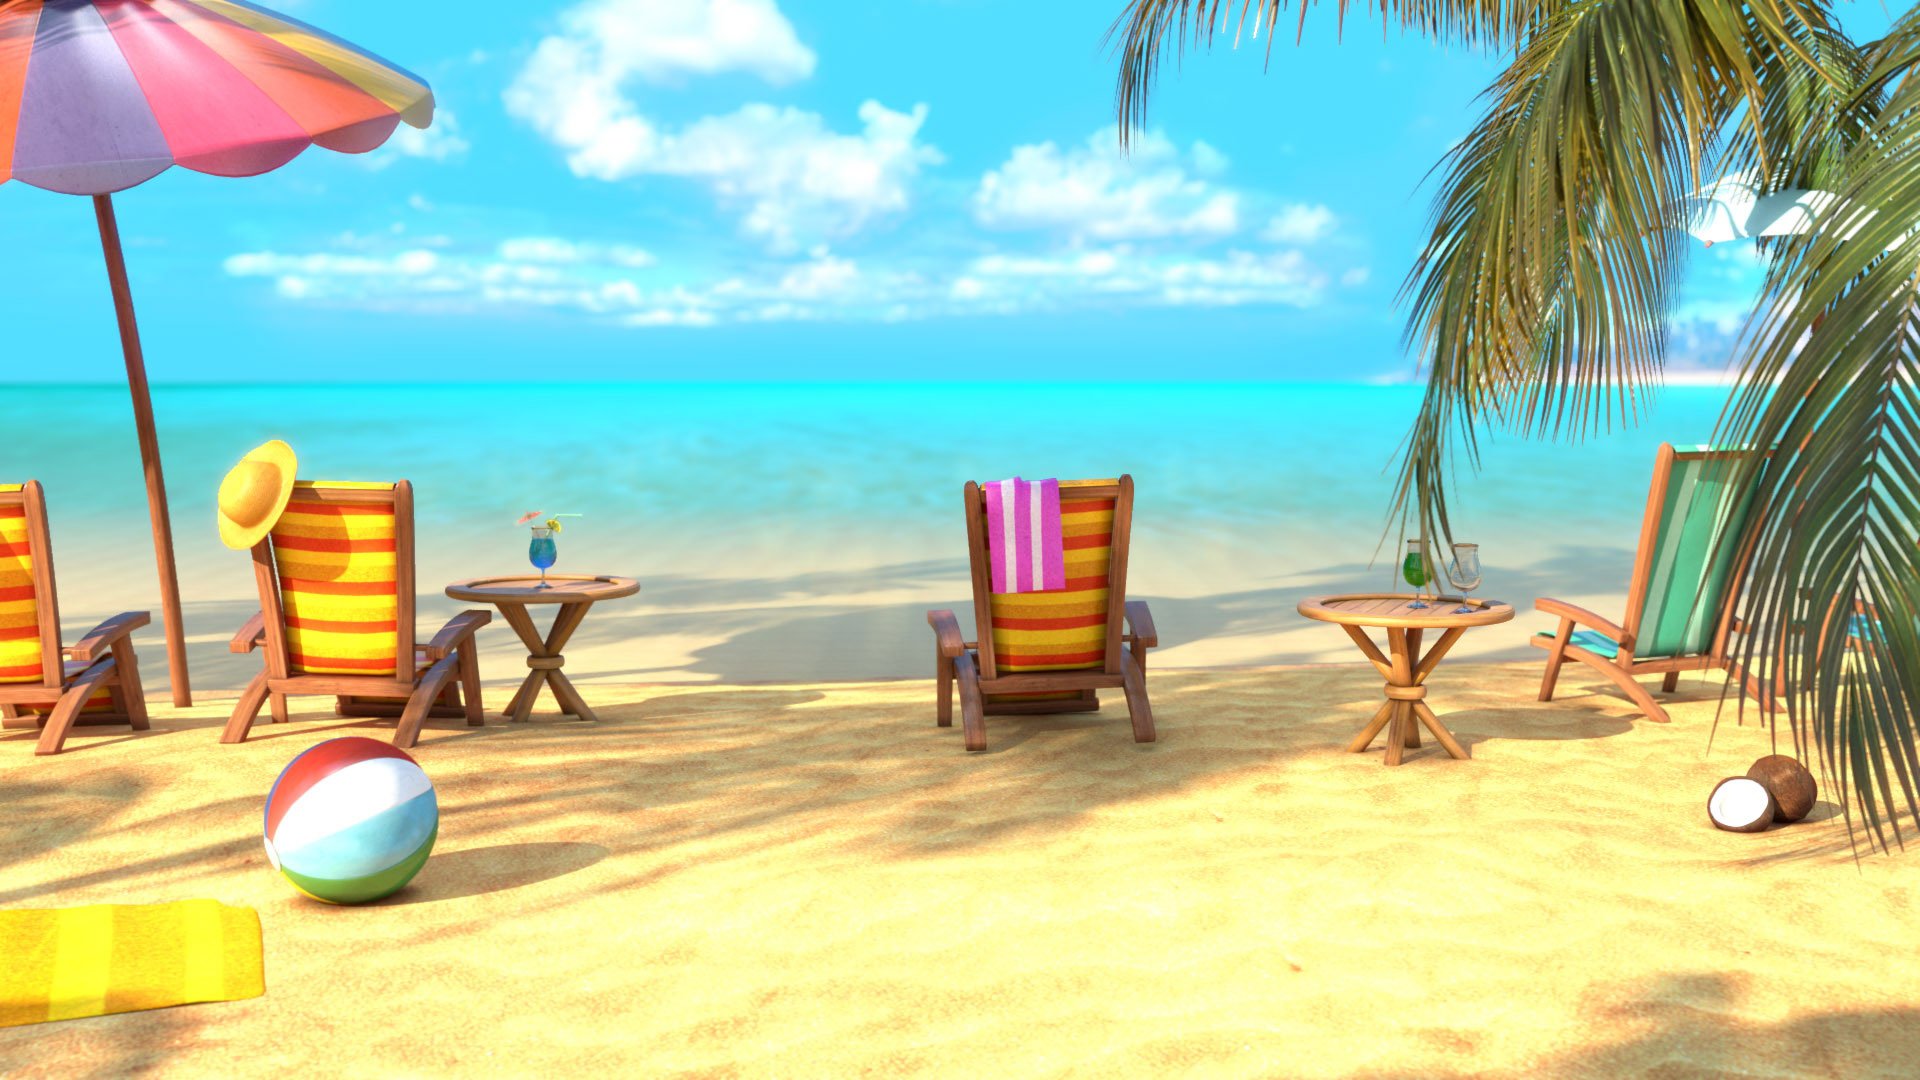 Game hight resolution background The Tipsy Tourist